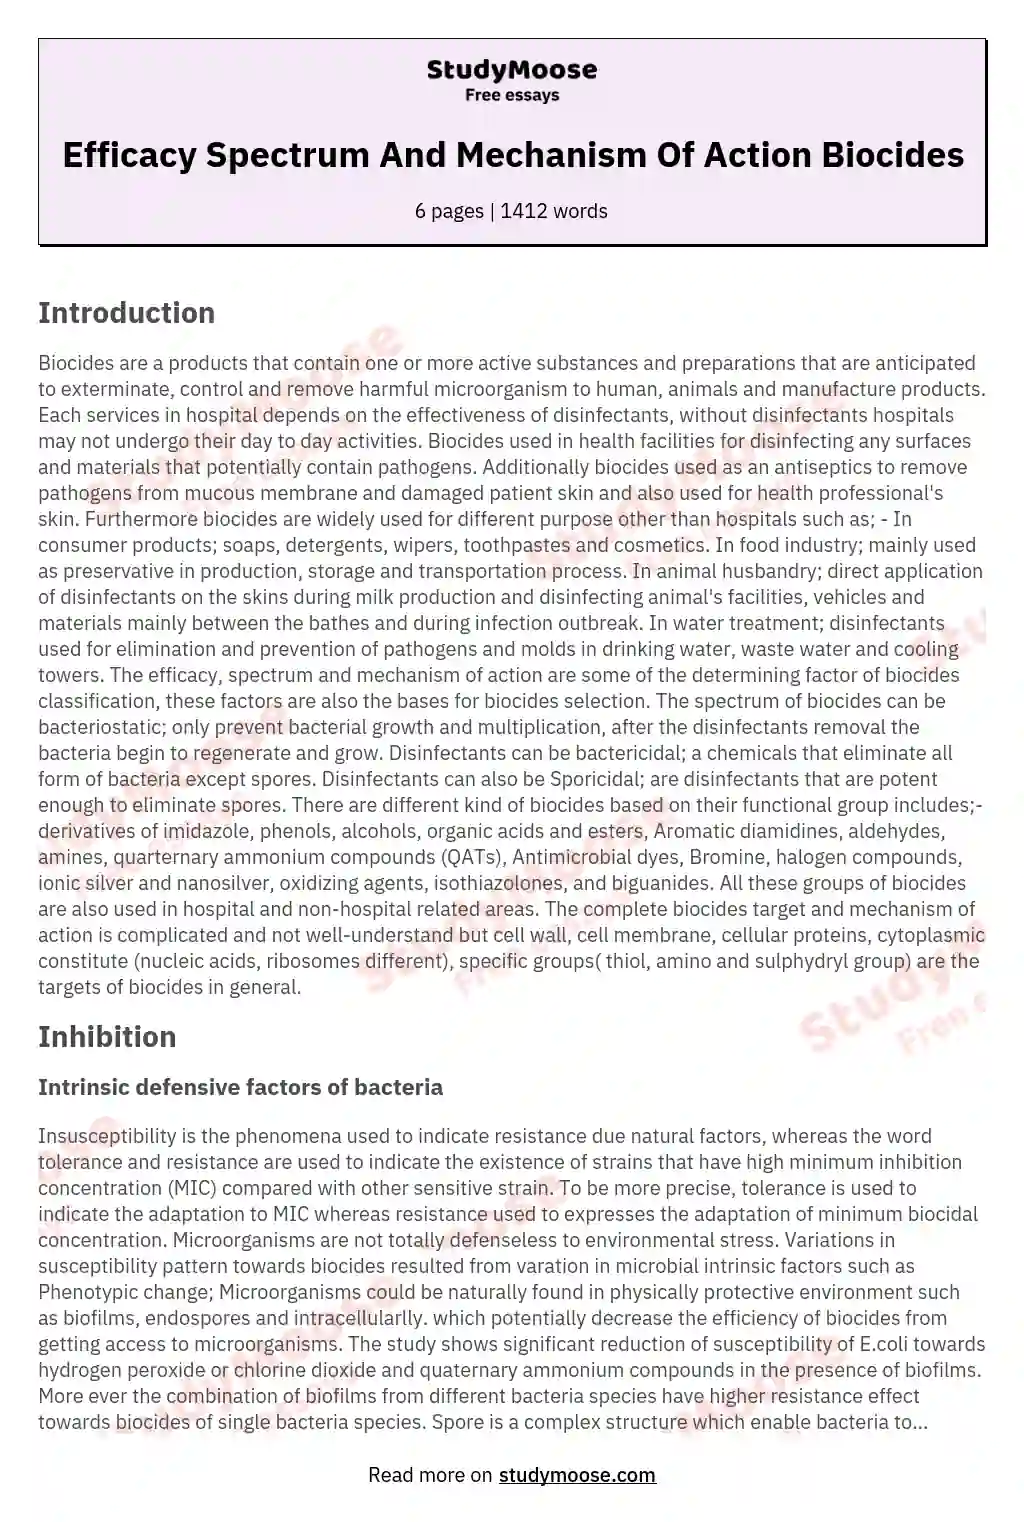 Efficacy Spectrum And Mechanism Of Action Biocides essay